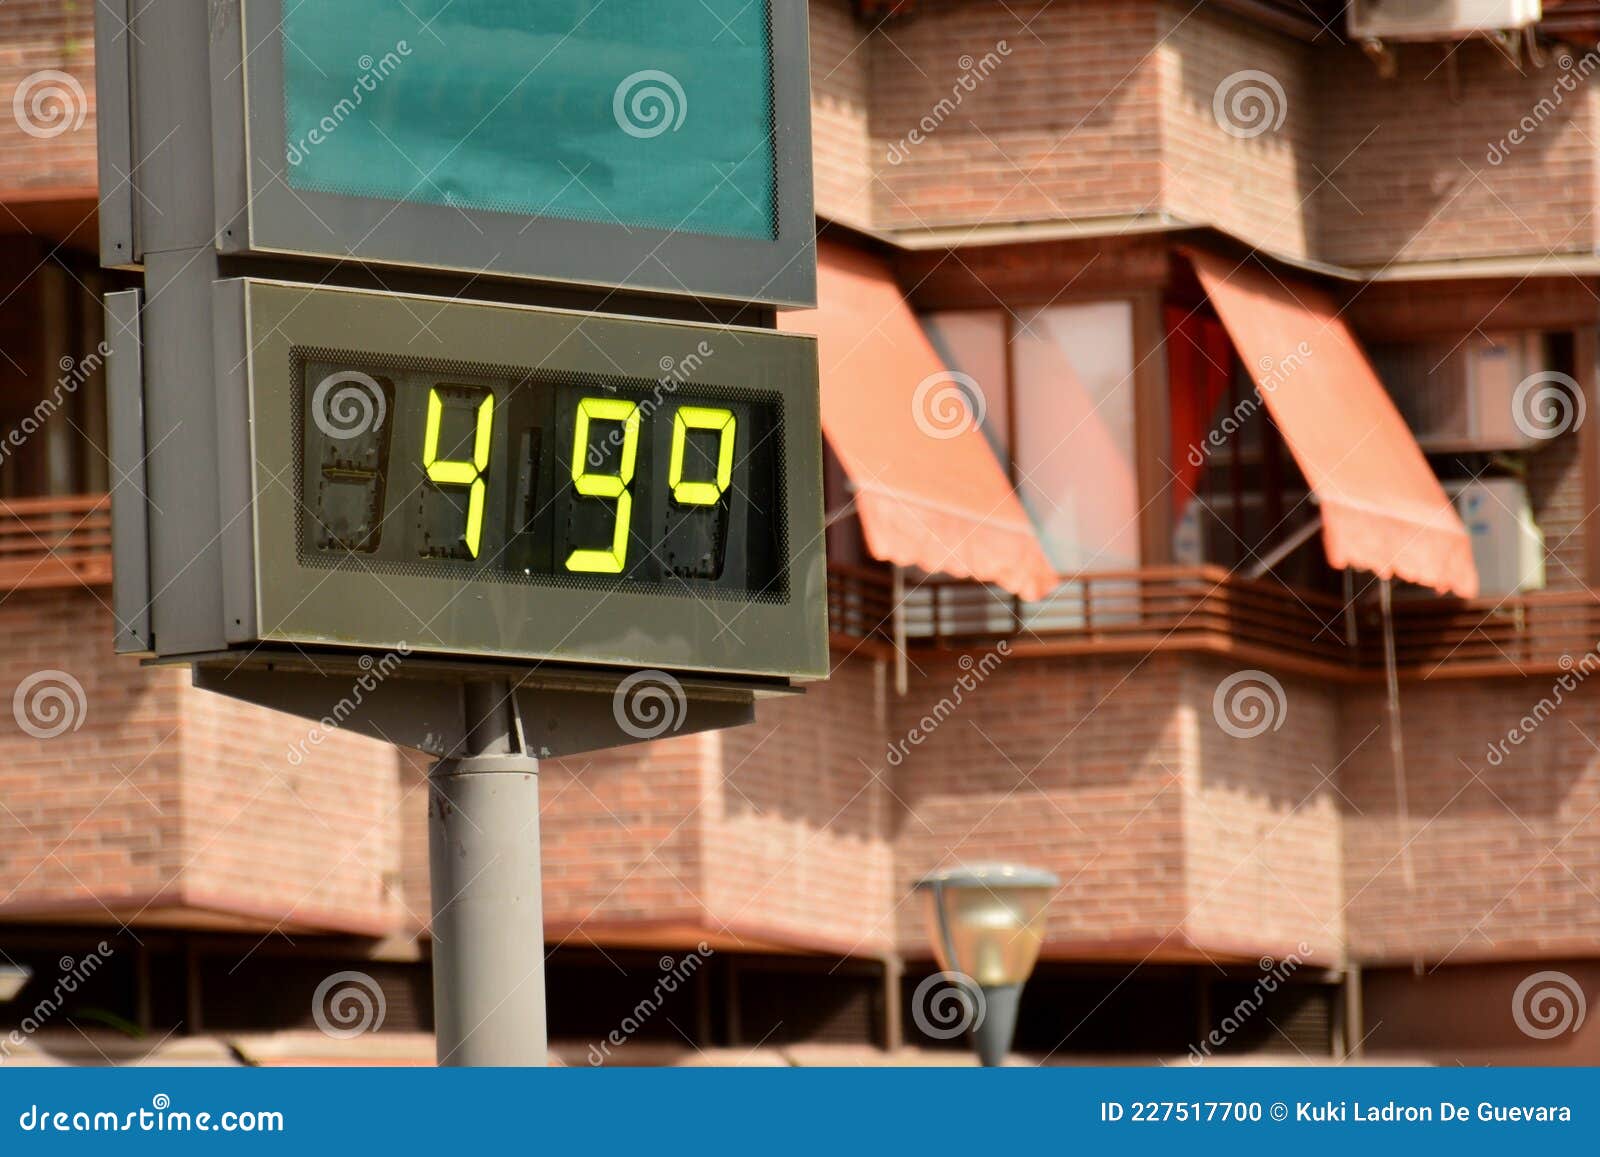 street thermometer marking 49 degrees